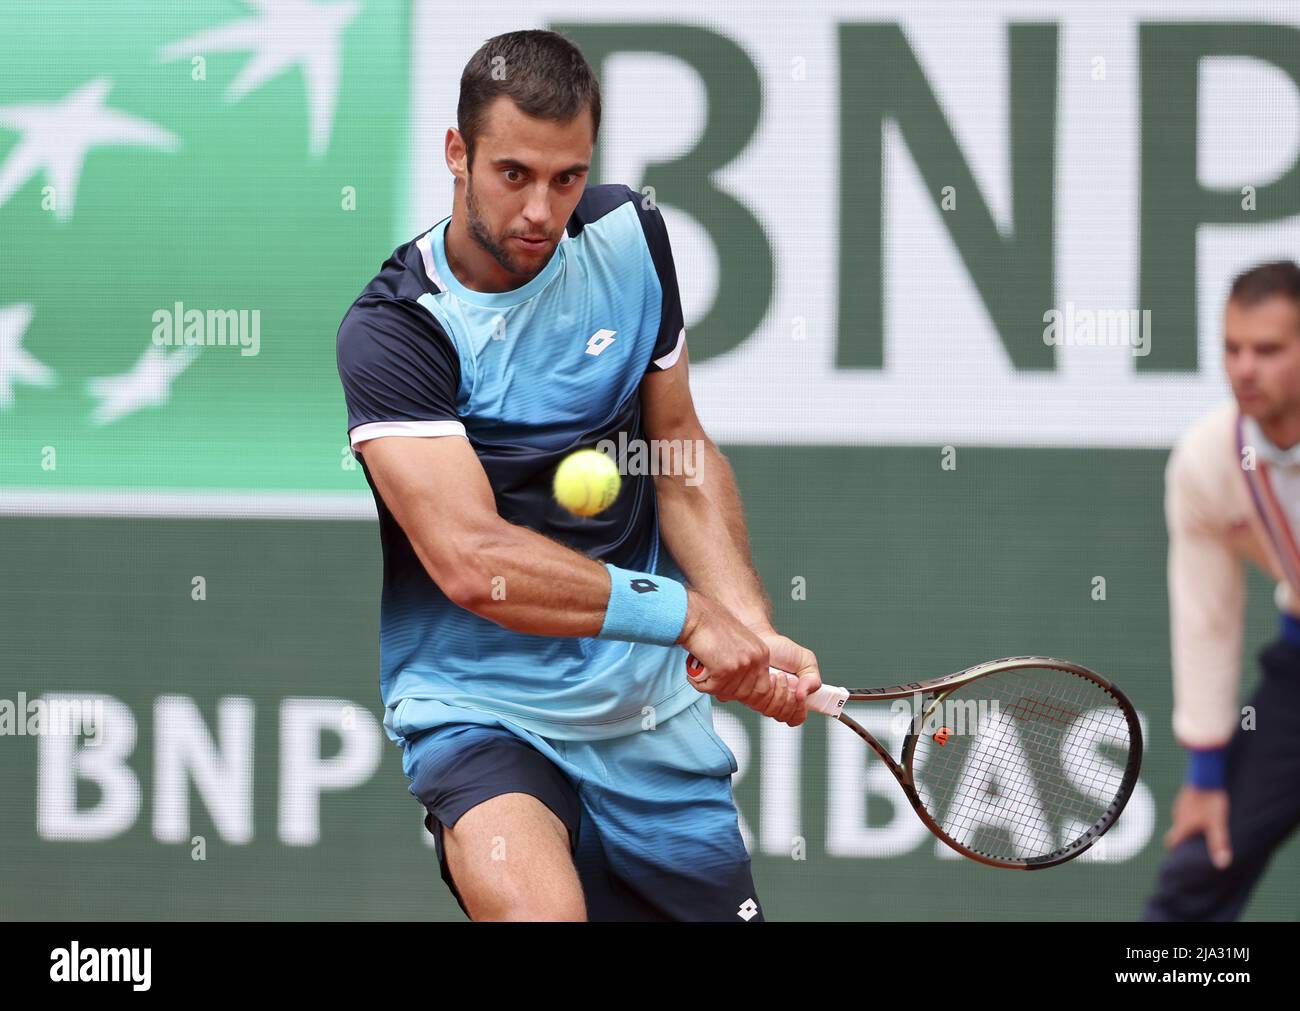 Paris, France - 26/05/2022, Laslo Djere of Serbia during day 5 of the French  Open 2022, Roland-Garros 2022, second Grand Slam tennis tournament of the  season on May 26, 2022 at Roland-Garros